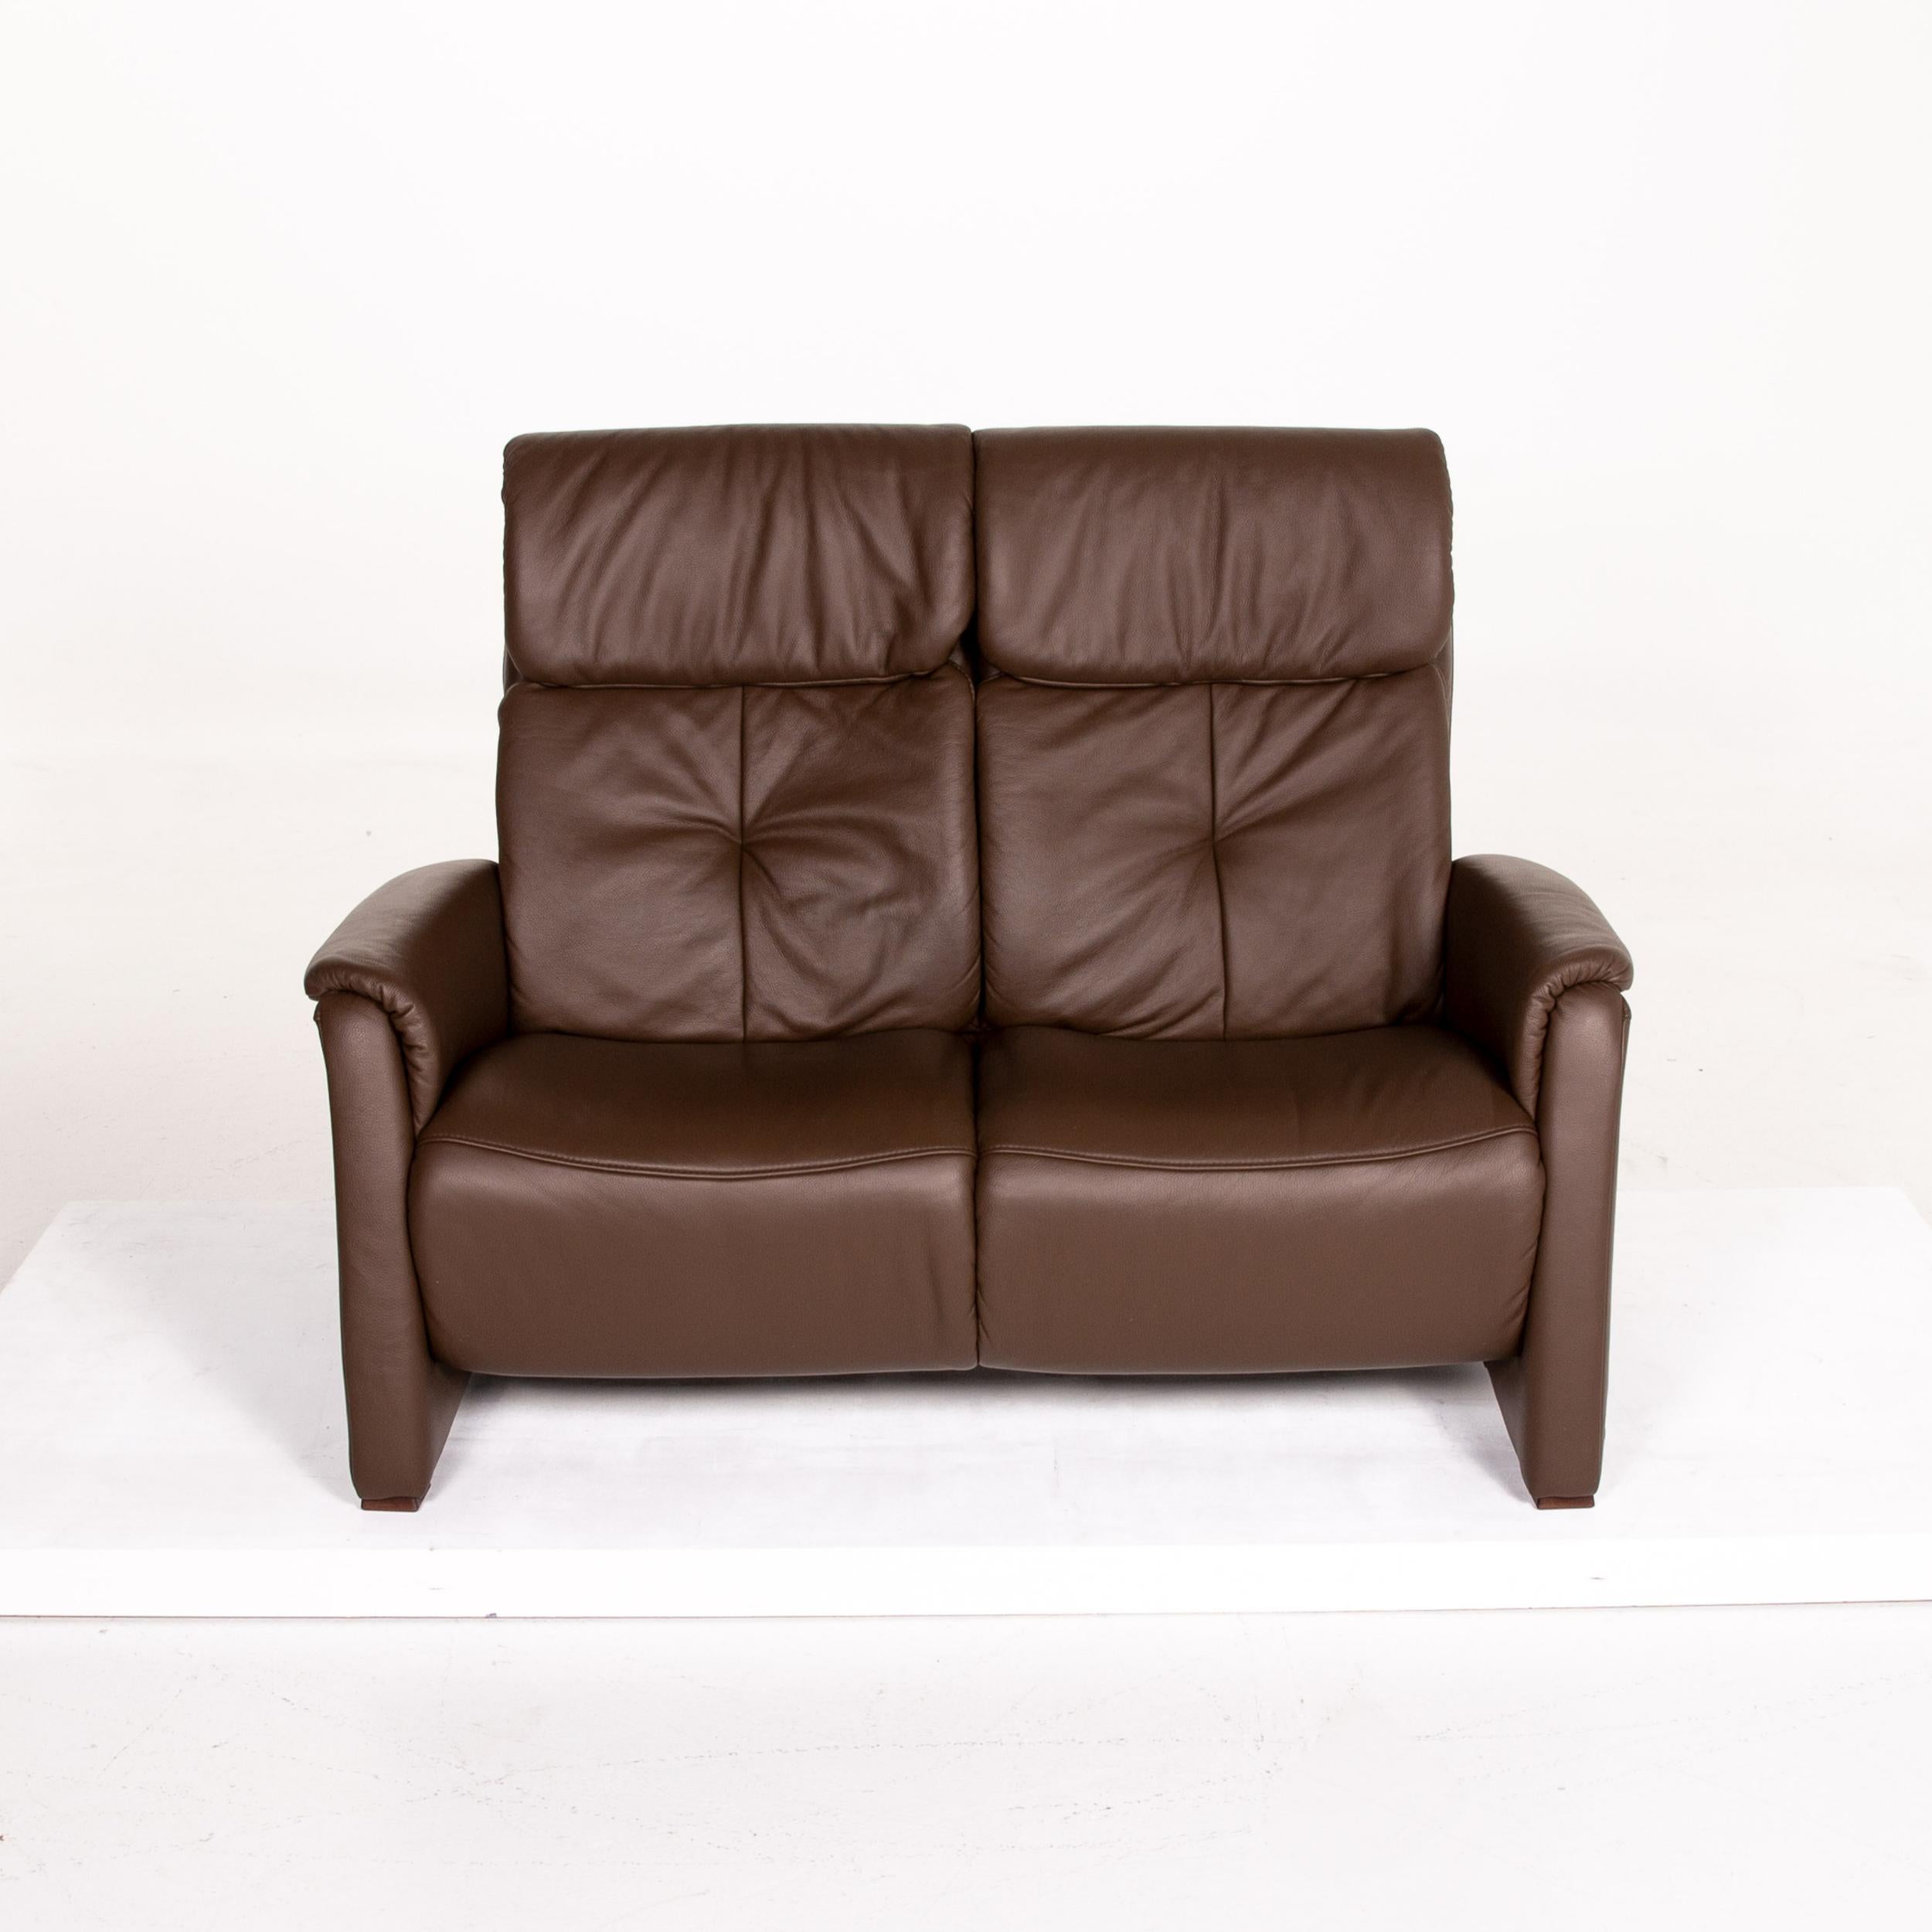 Polish Himolla Leather Sofa Dark Brown Brown Two-Seat Function Relax Function Couch For Sale